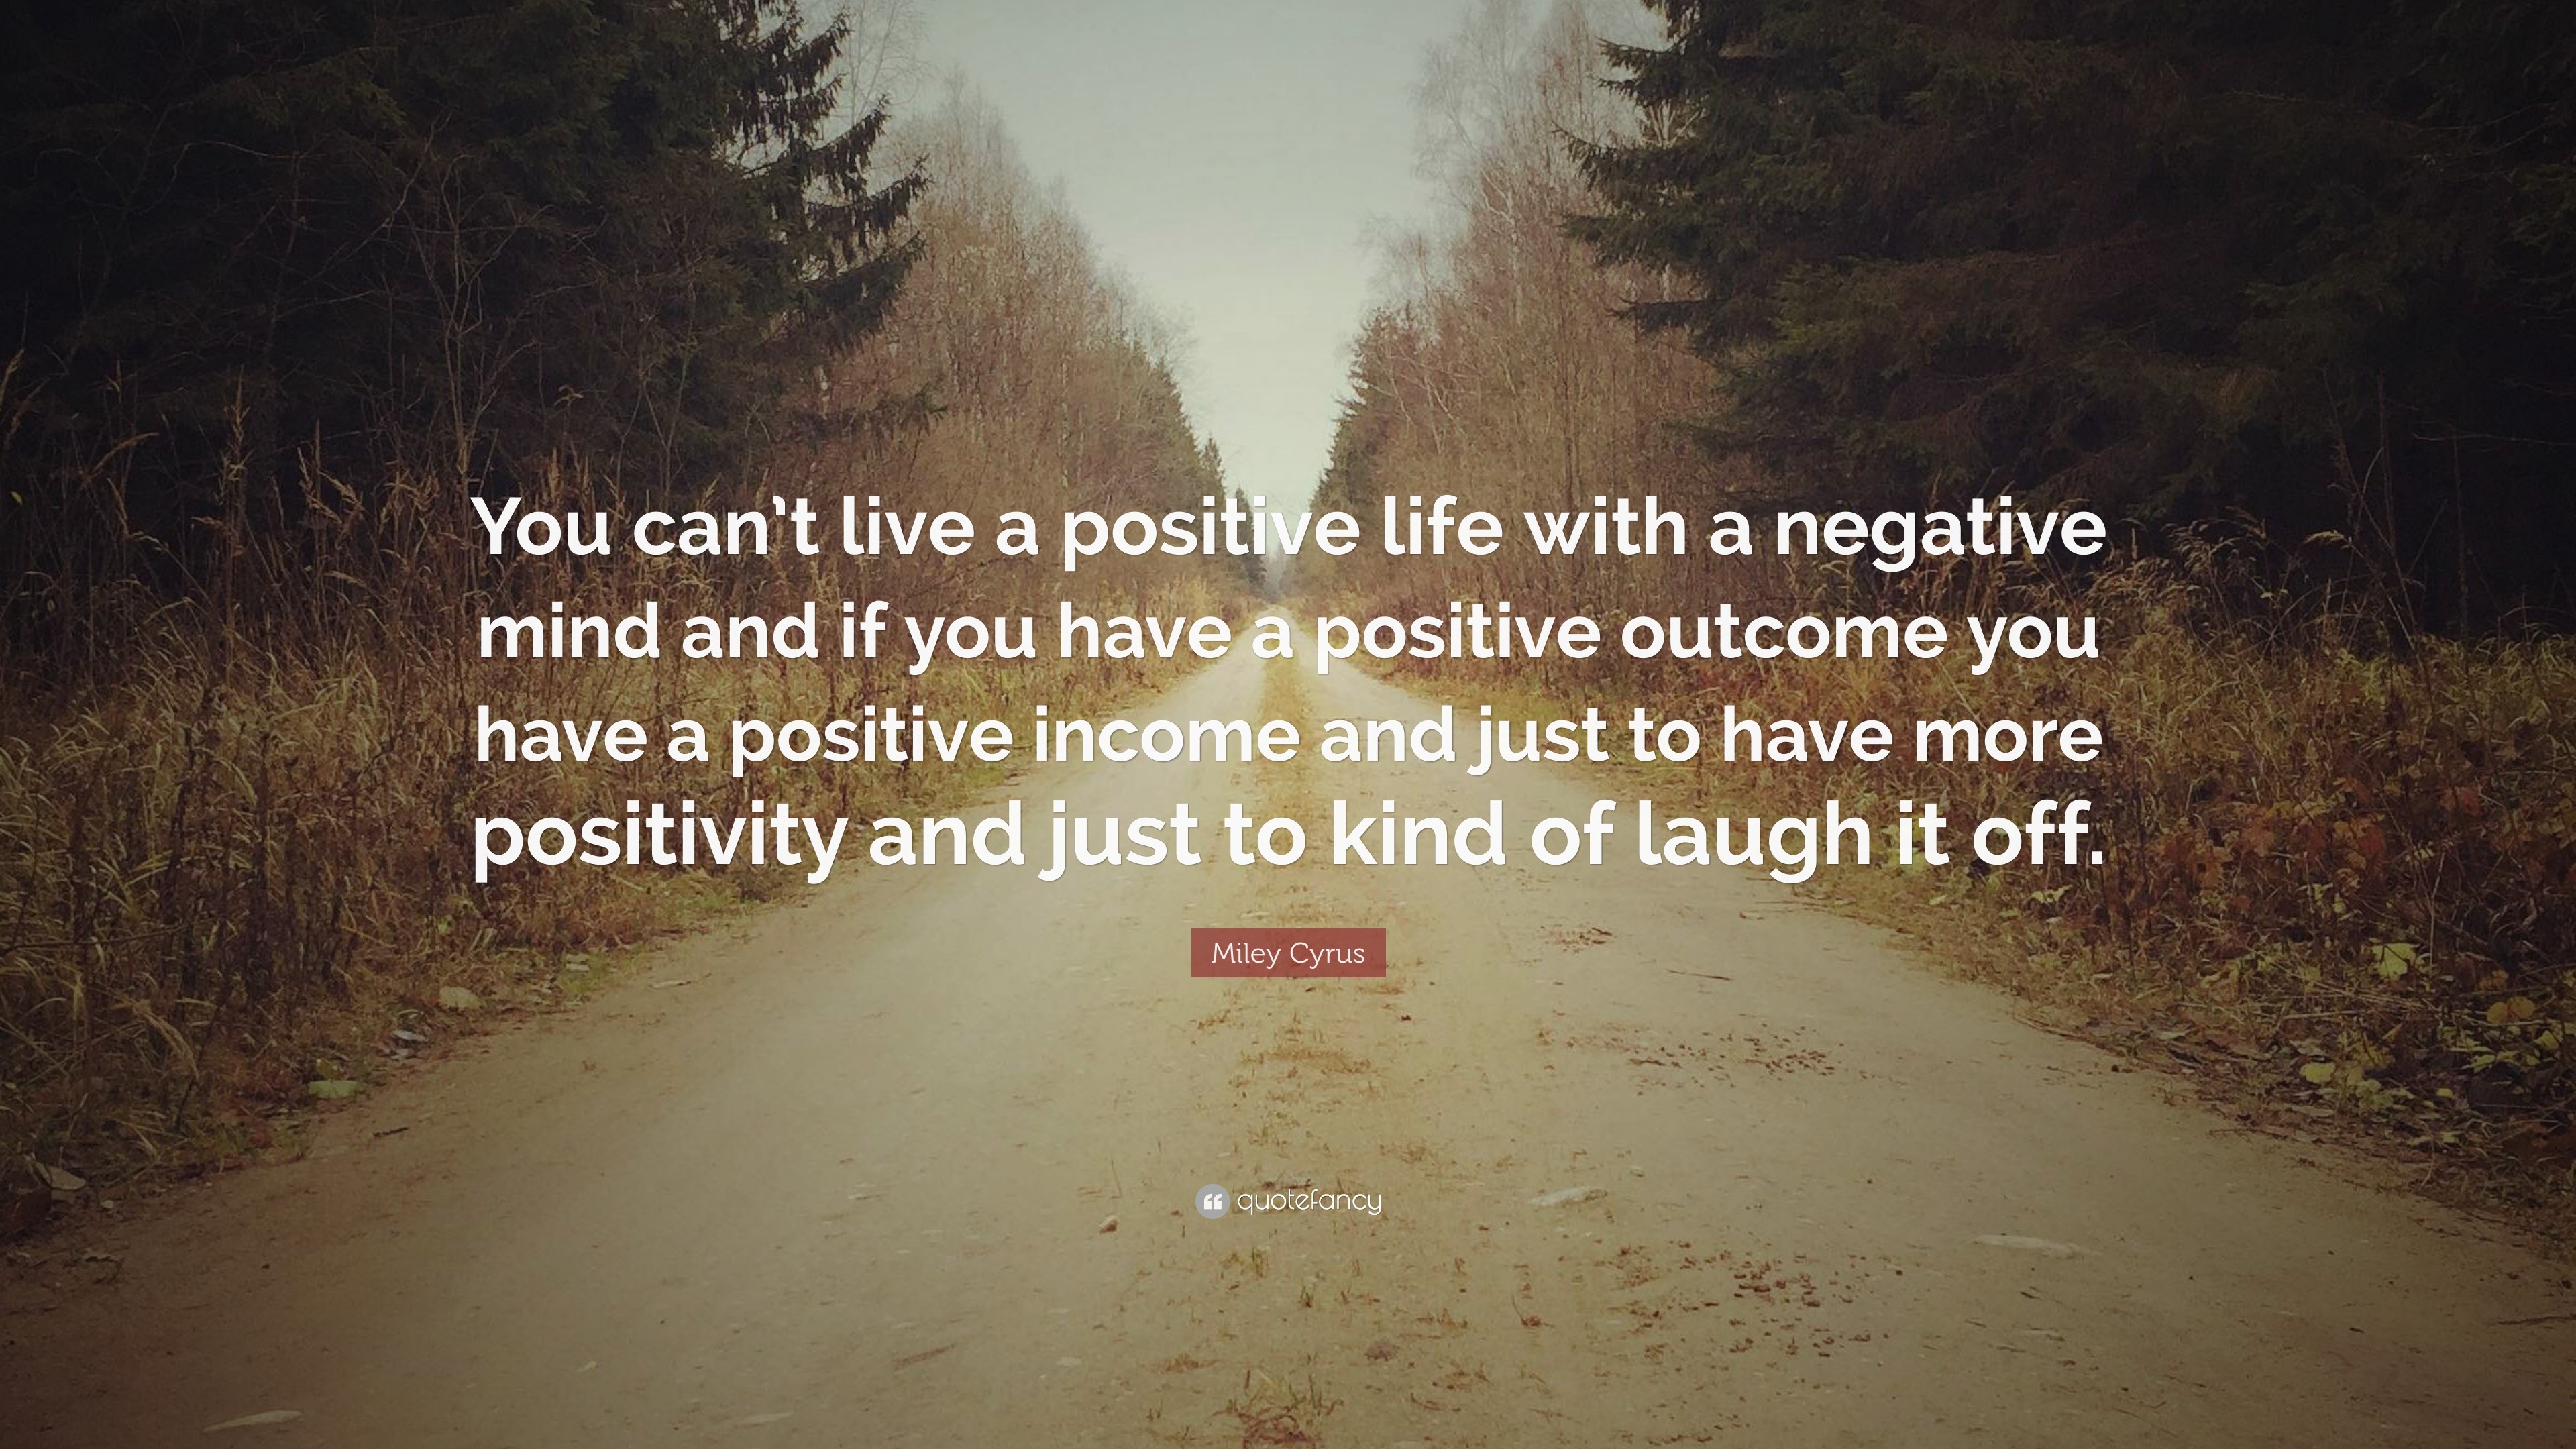 You Cant Live a Positive Life with a Negative Mind Jumbo Fridge Magnet